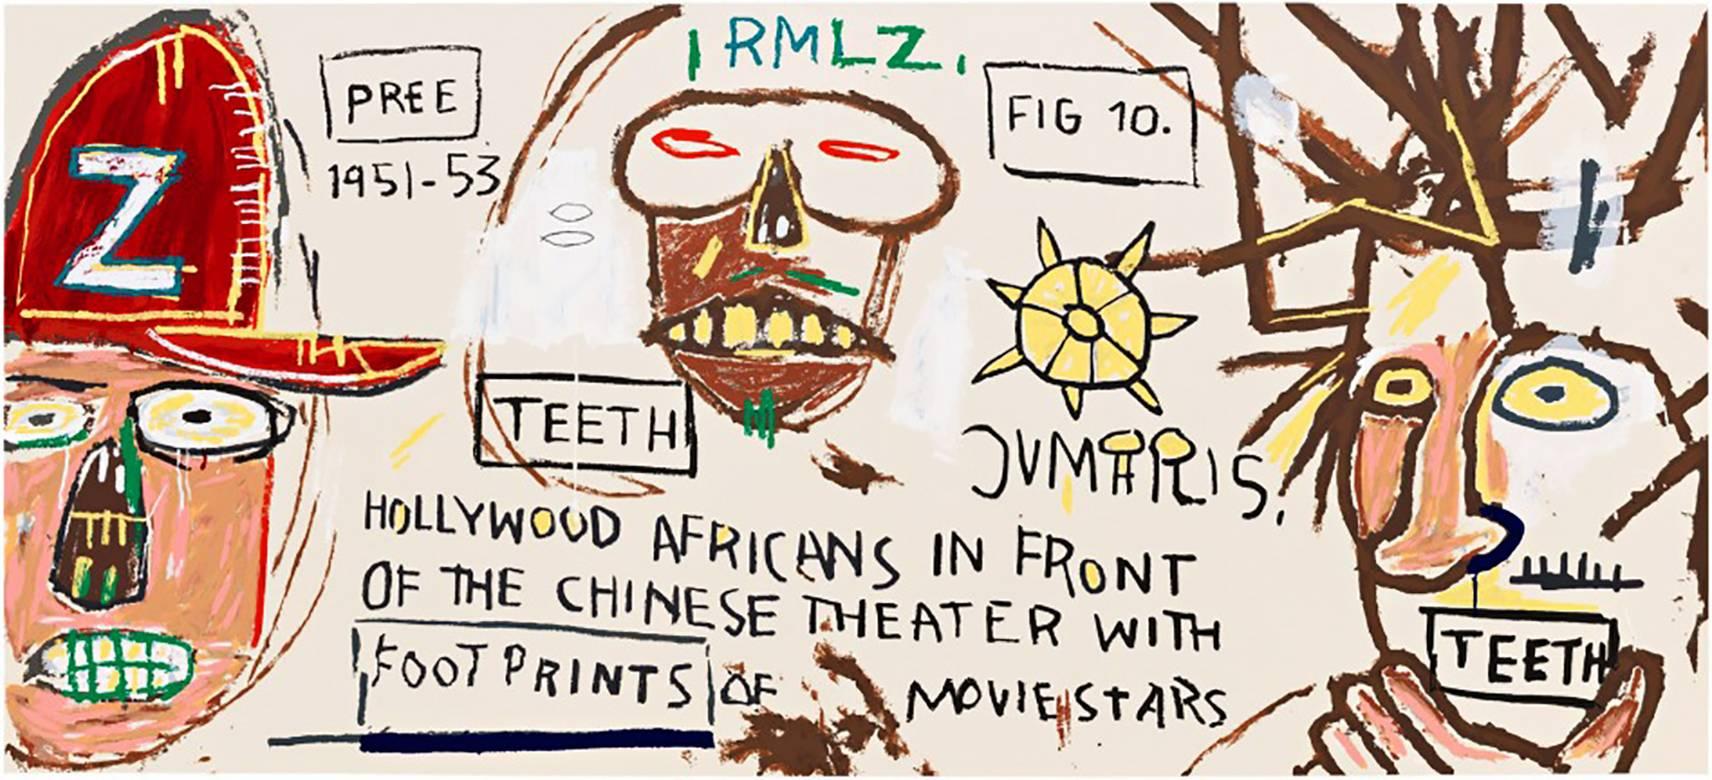 after Jean-Michel Basquiat Figurative Print - HOLLYWOOD AFRICANS IN FRONT OF THE CHINESE THEATER WITH FOOTPRINTS OF MOVIE STAR